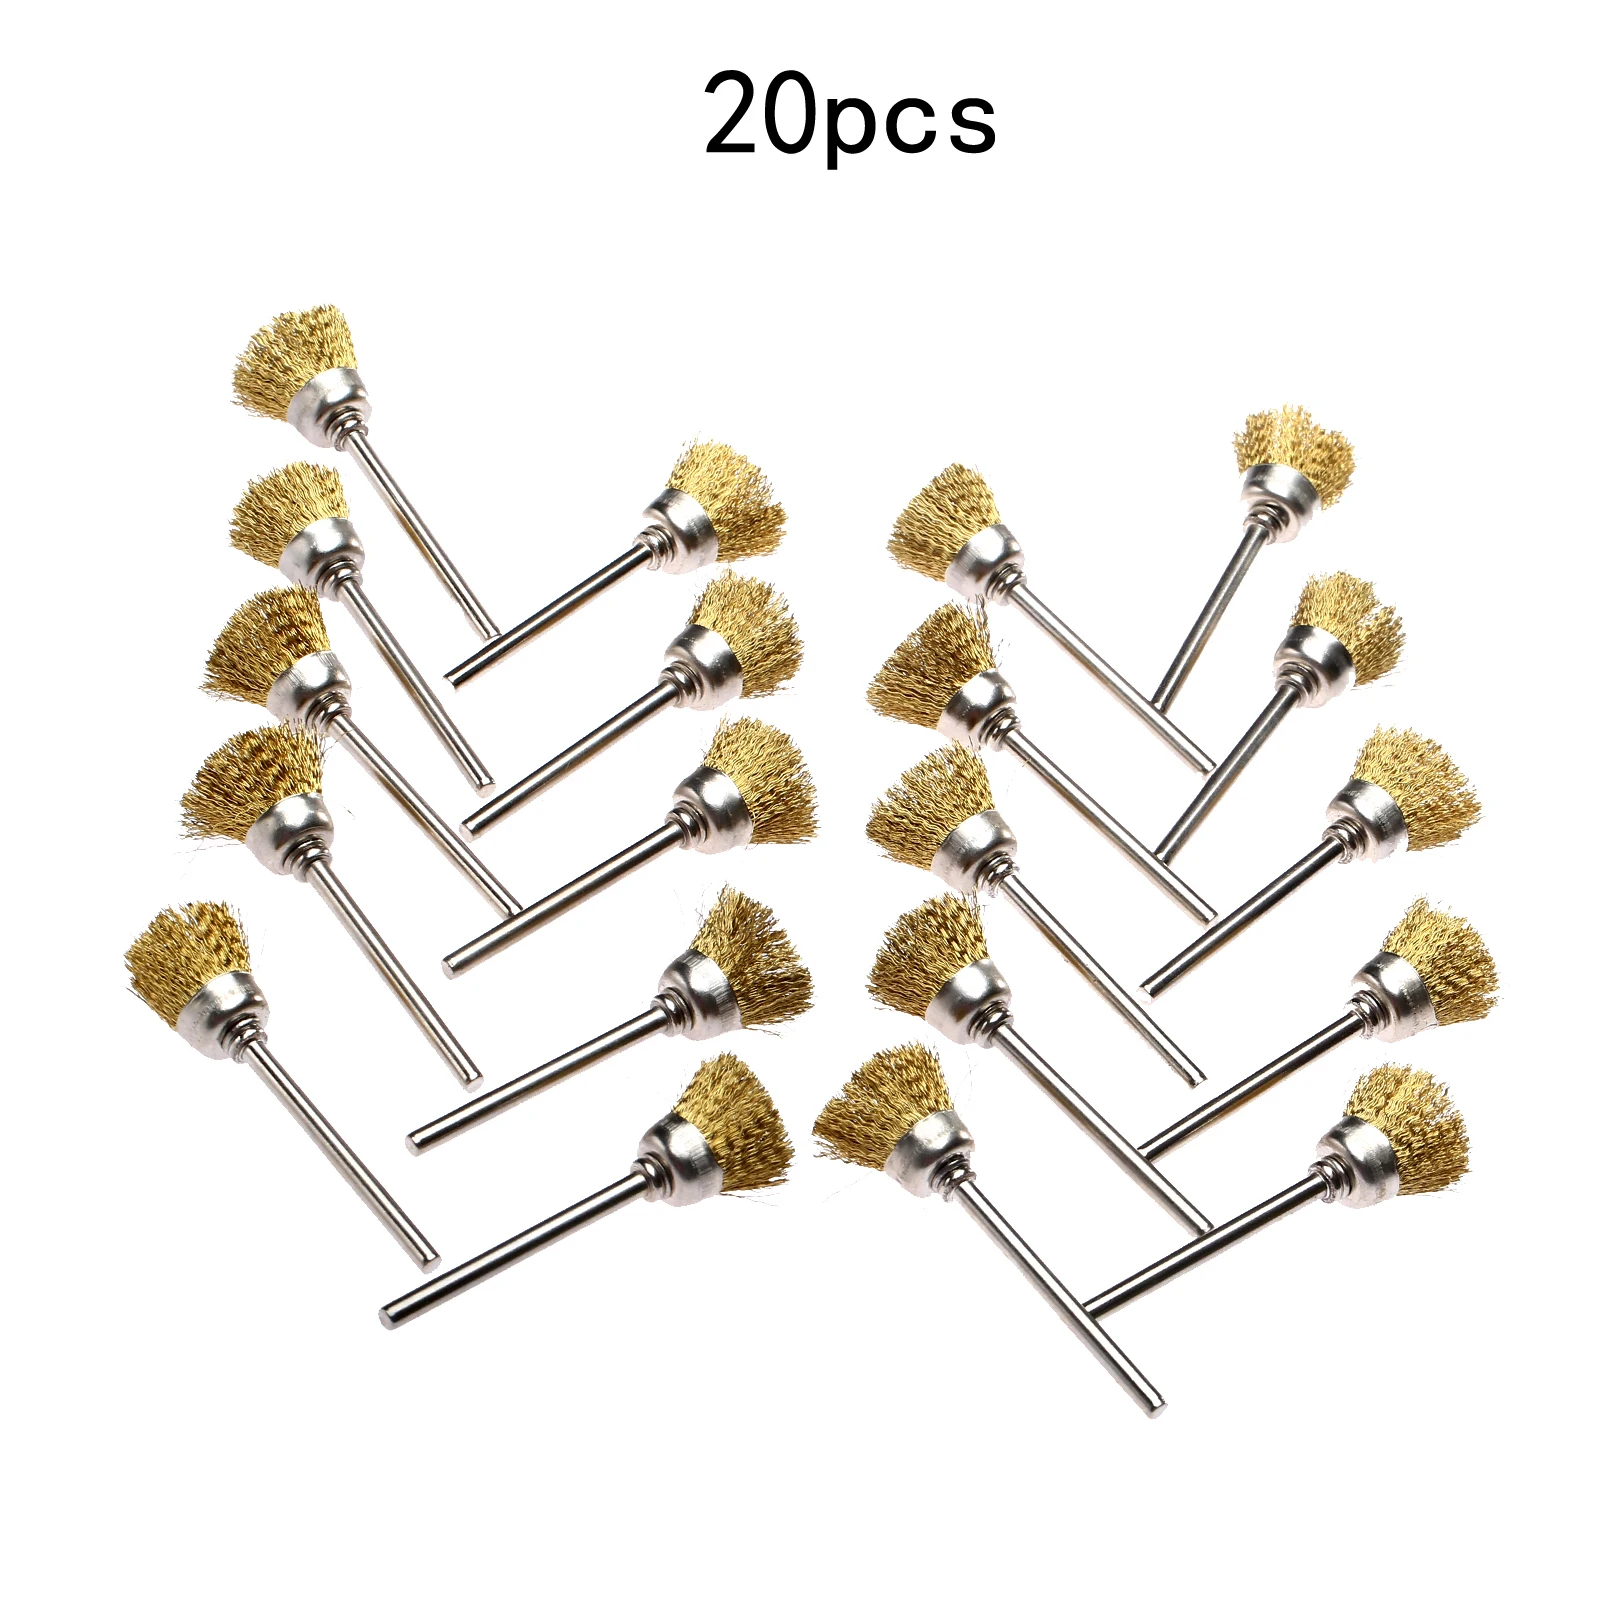 

20Pcs 15mm Buffing Polishing Brush Brass Wire Cup Brush For Dremel Rotary Tool For Cleaning Metallic Surface, Removing Rust